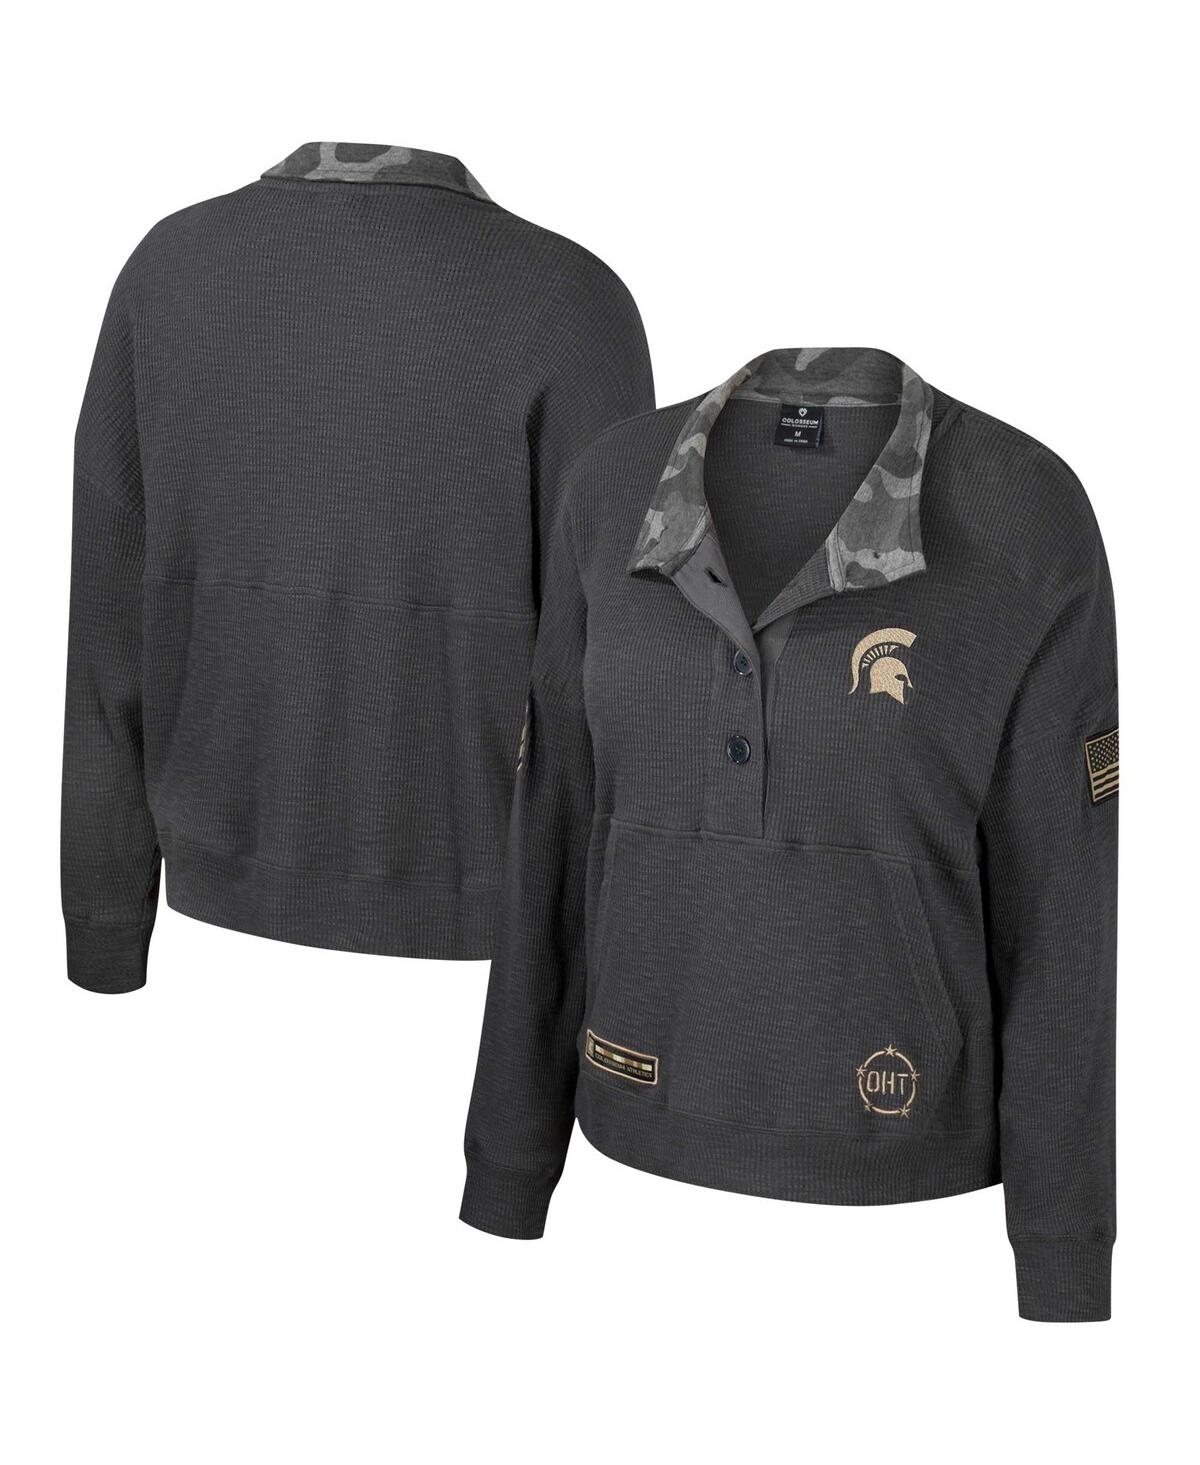 Women's Colosseum Heather Charcoal Michigan State Spartans Oht Military-Inspired Appreciation Payback Henley Thermal Sweatshirt - Heather Charcoal